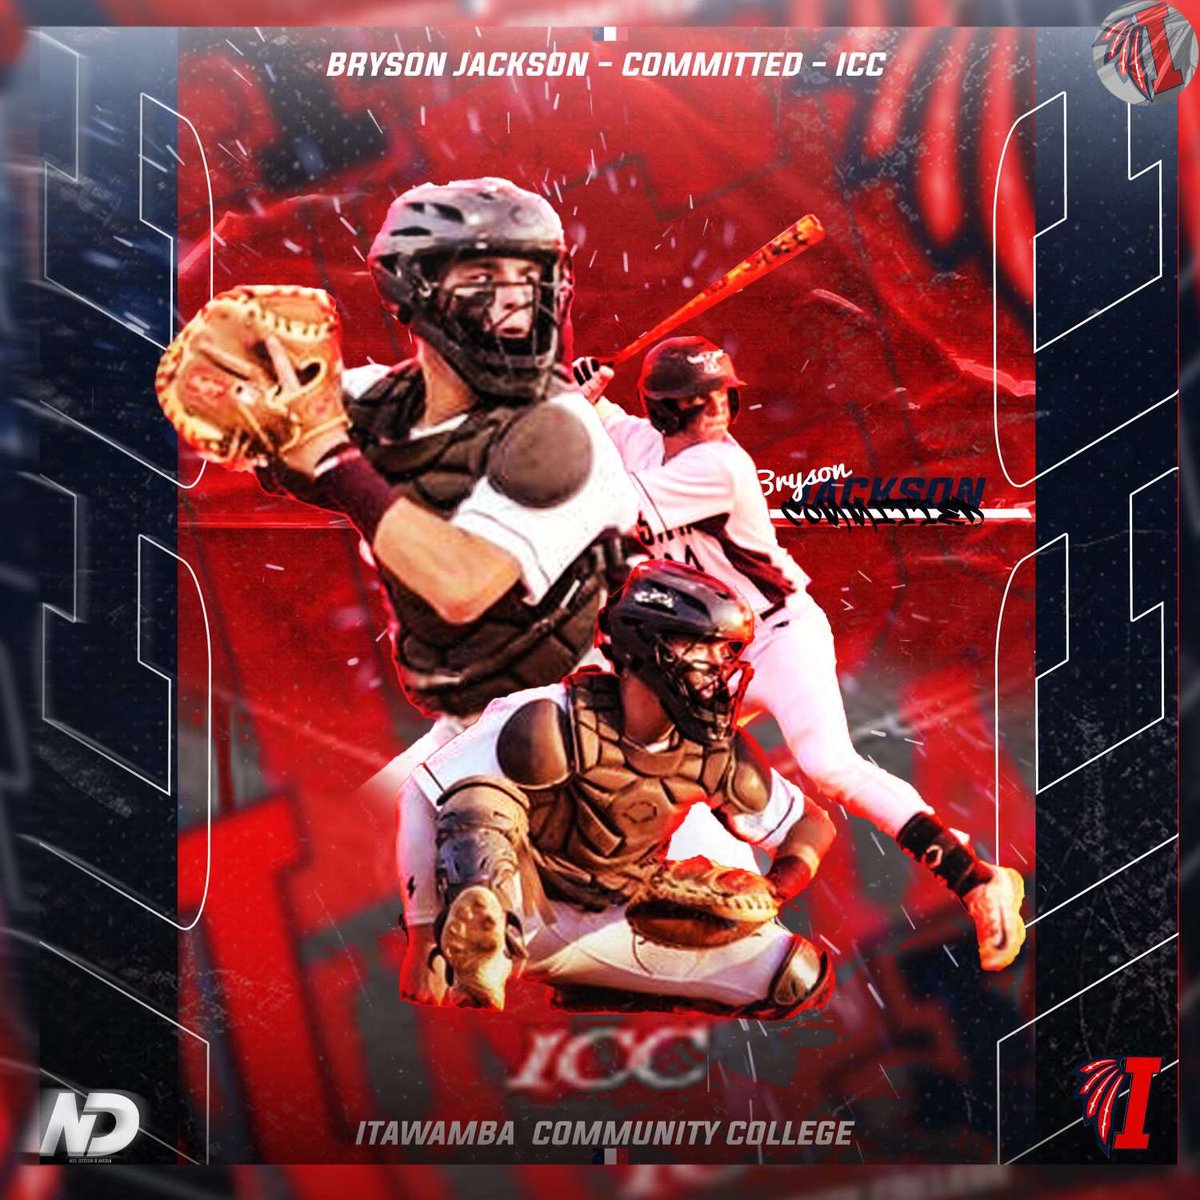 I am very blessed to announce that I will be continuing my academic and baseball careers at ICC. I am thankful for God allowing me this opportunity. I would also like to thank my parents, family, coaches, and everyone else that helped me along the way.🔴🔵 #rolltribe @LetsGoICC